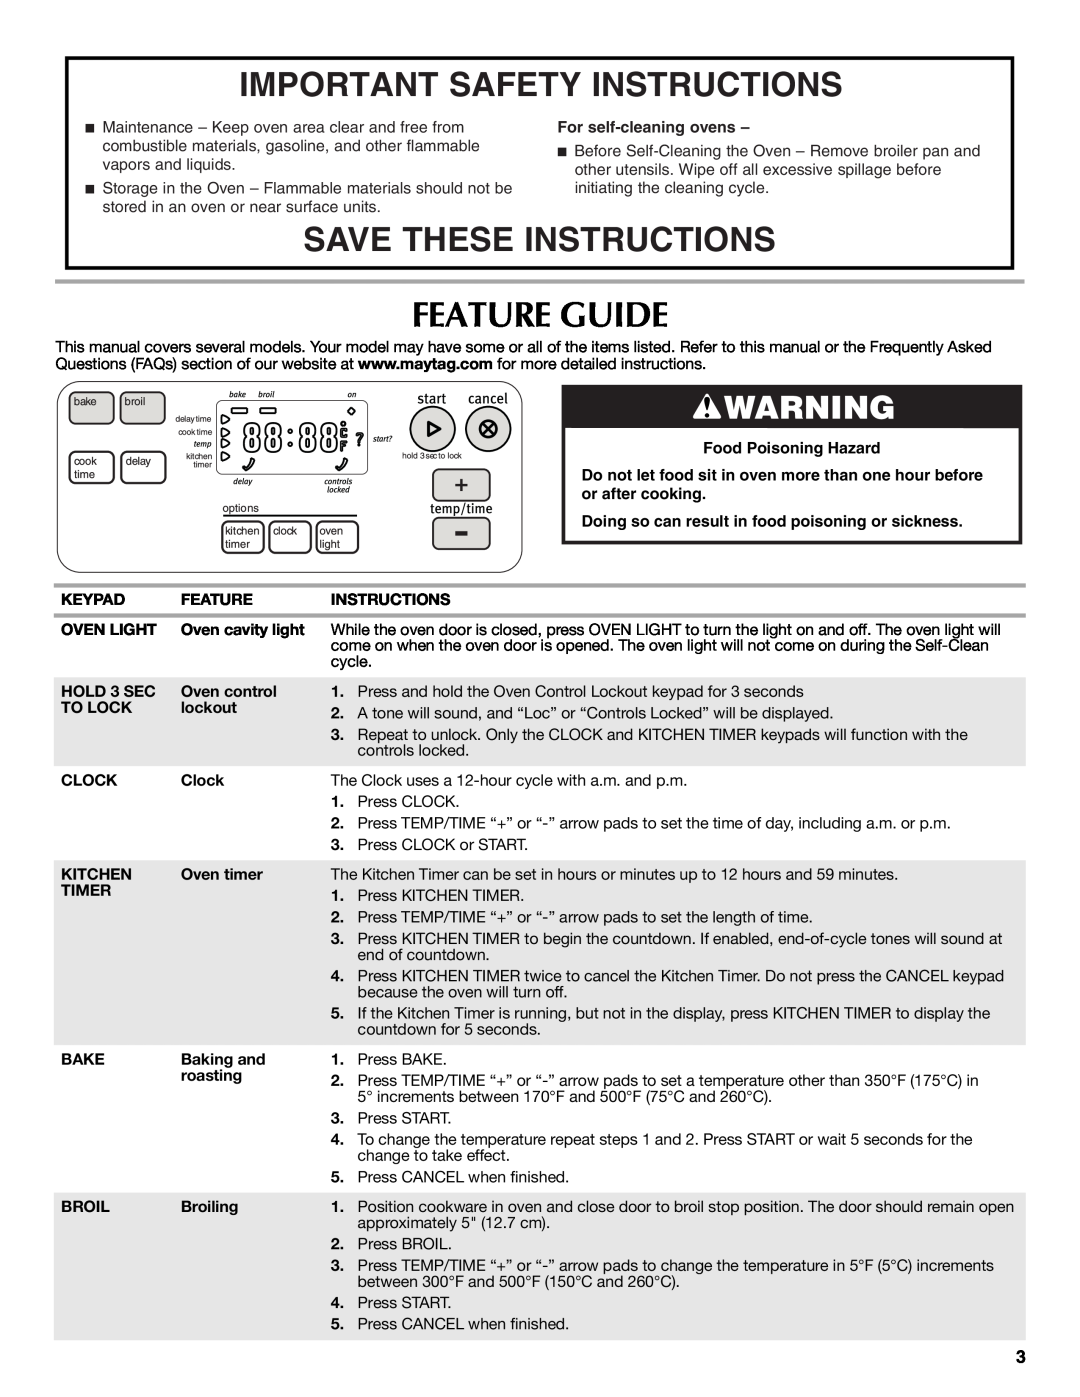 Maytag CWG3600AA, W10203503B Feature Guide, Important Safety Instructions, Save These Instructions, For self-cleaningovens 